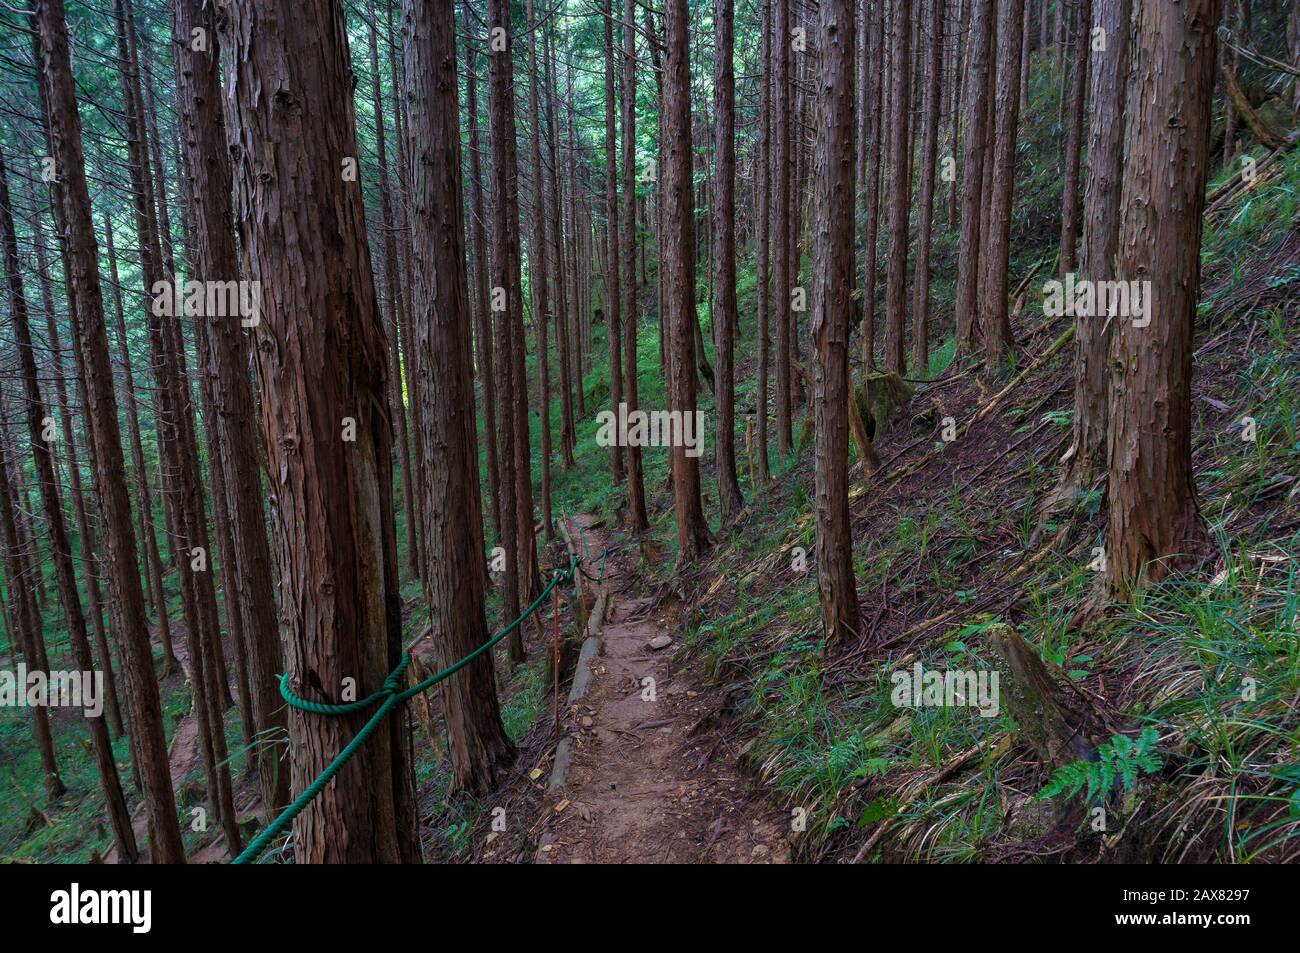 Narrow hiking trail in woods. Tree trunks and dirt path. Trekking in Japan. Nagano prefecture, Japan Stock Photo